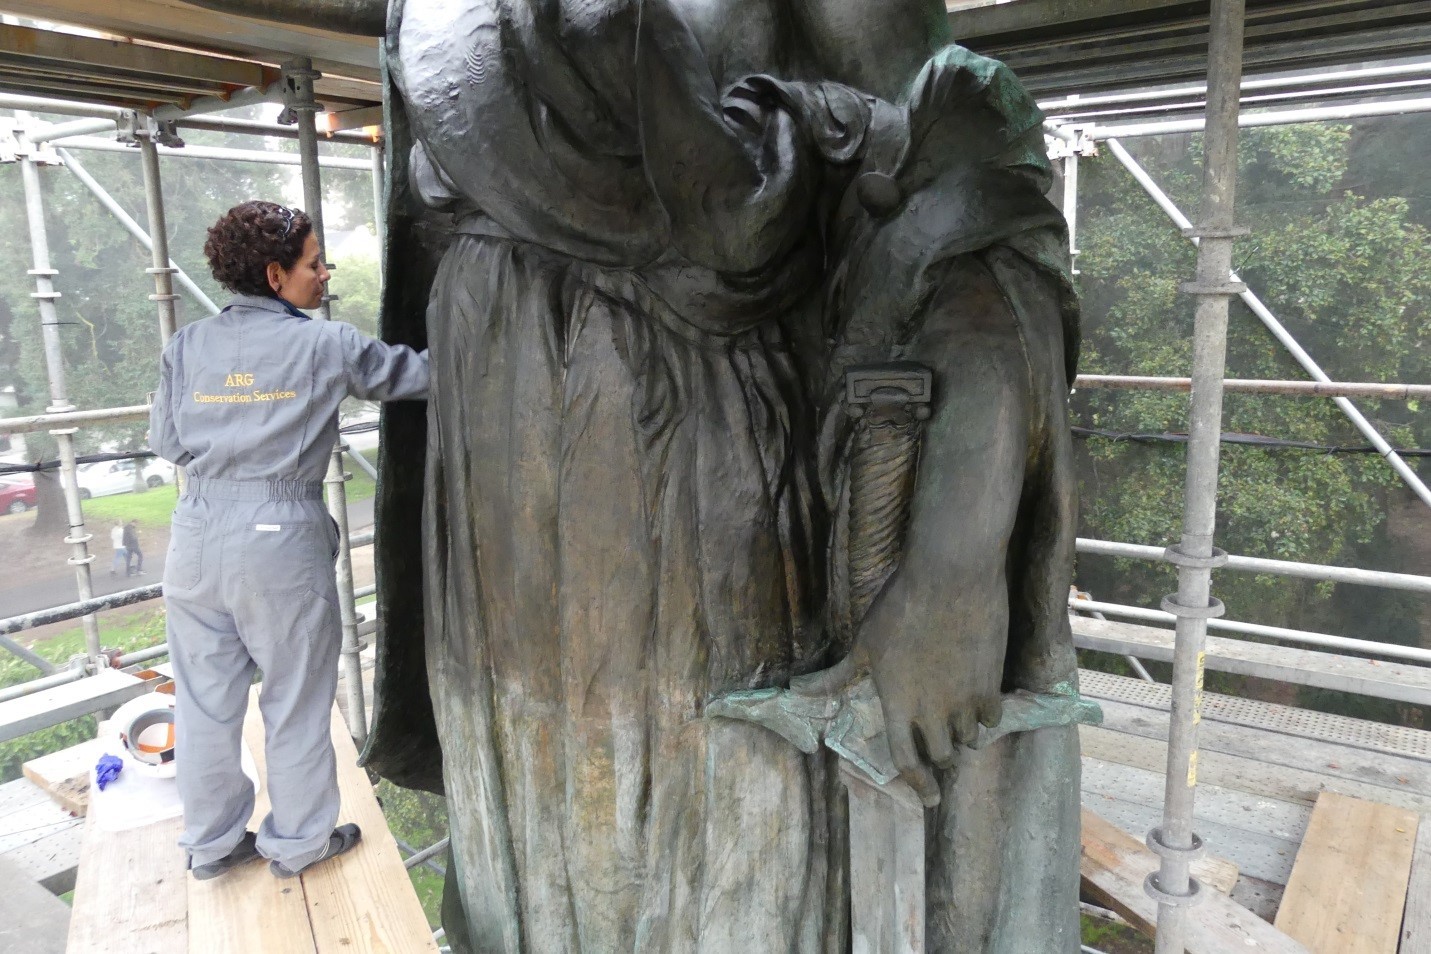 Image of fine arts conservator cleaning and applying a protective wax coating to the 5-story tall bronze sculpture.